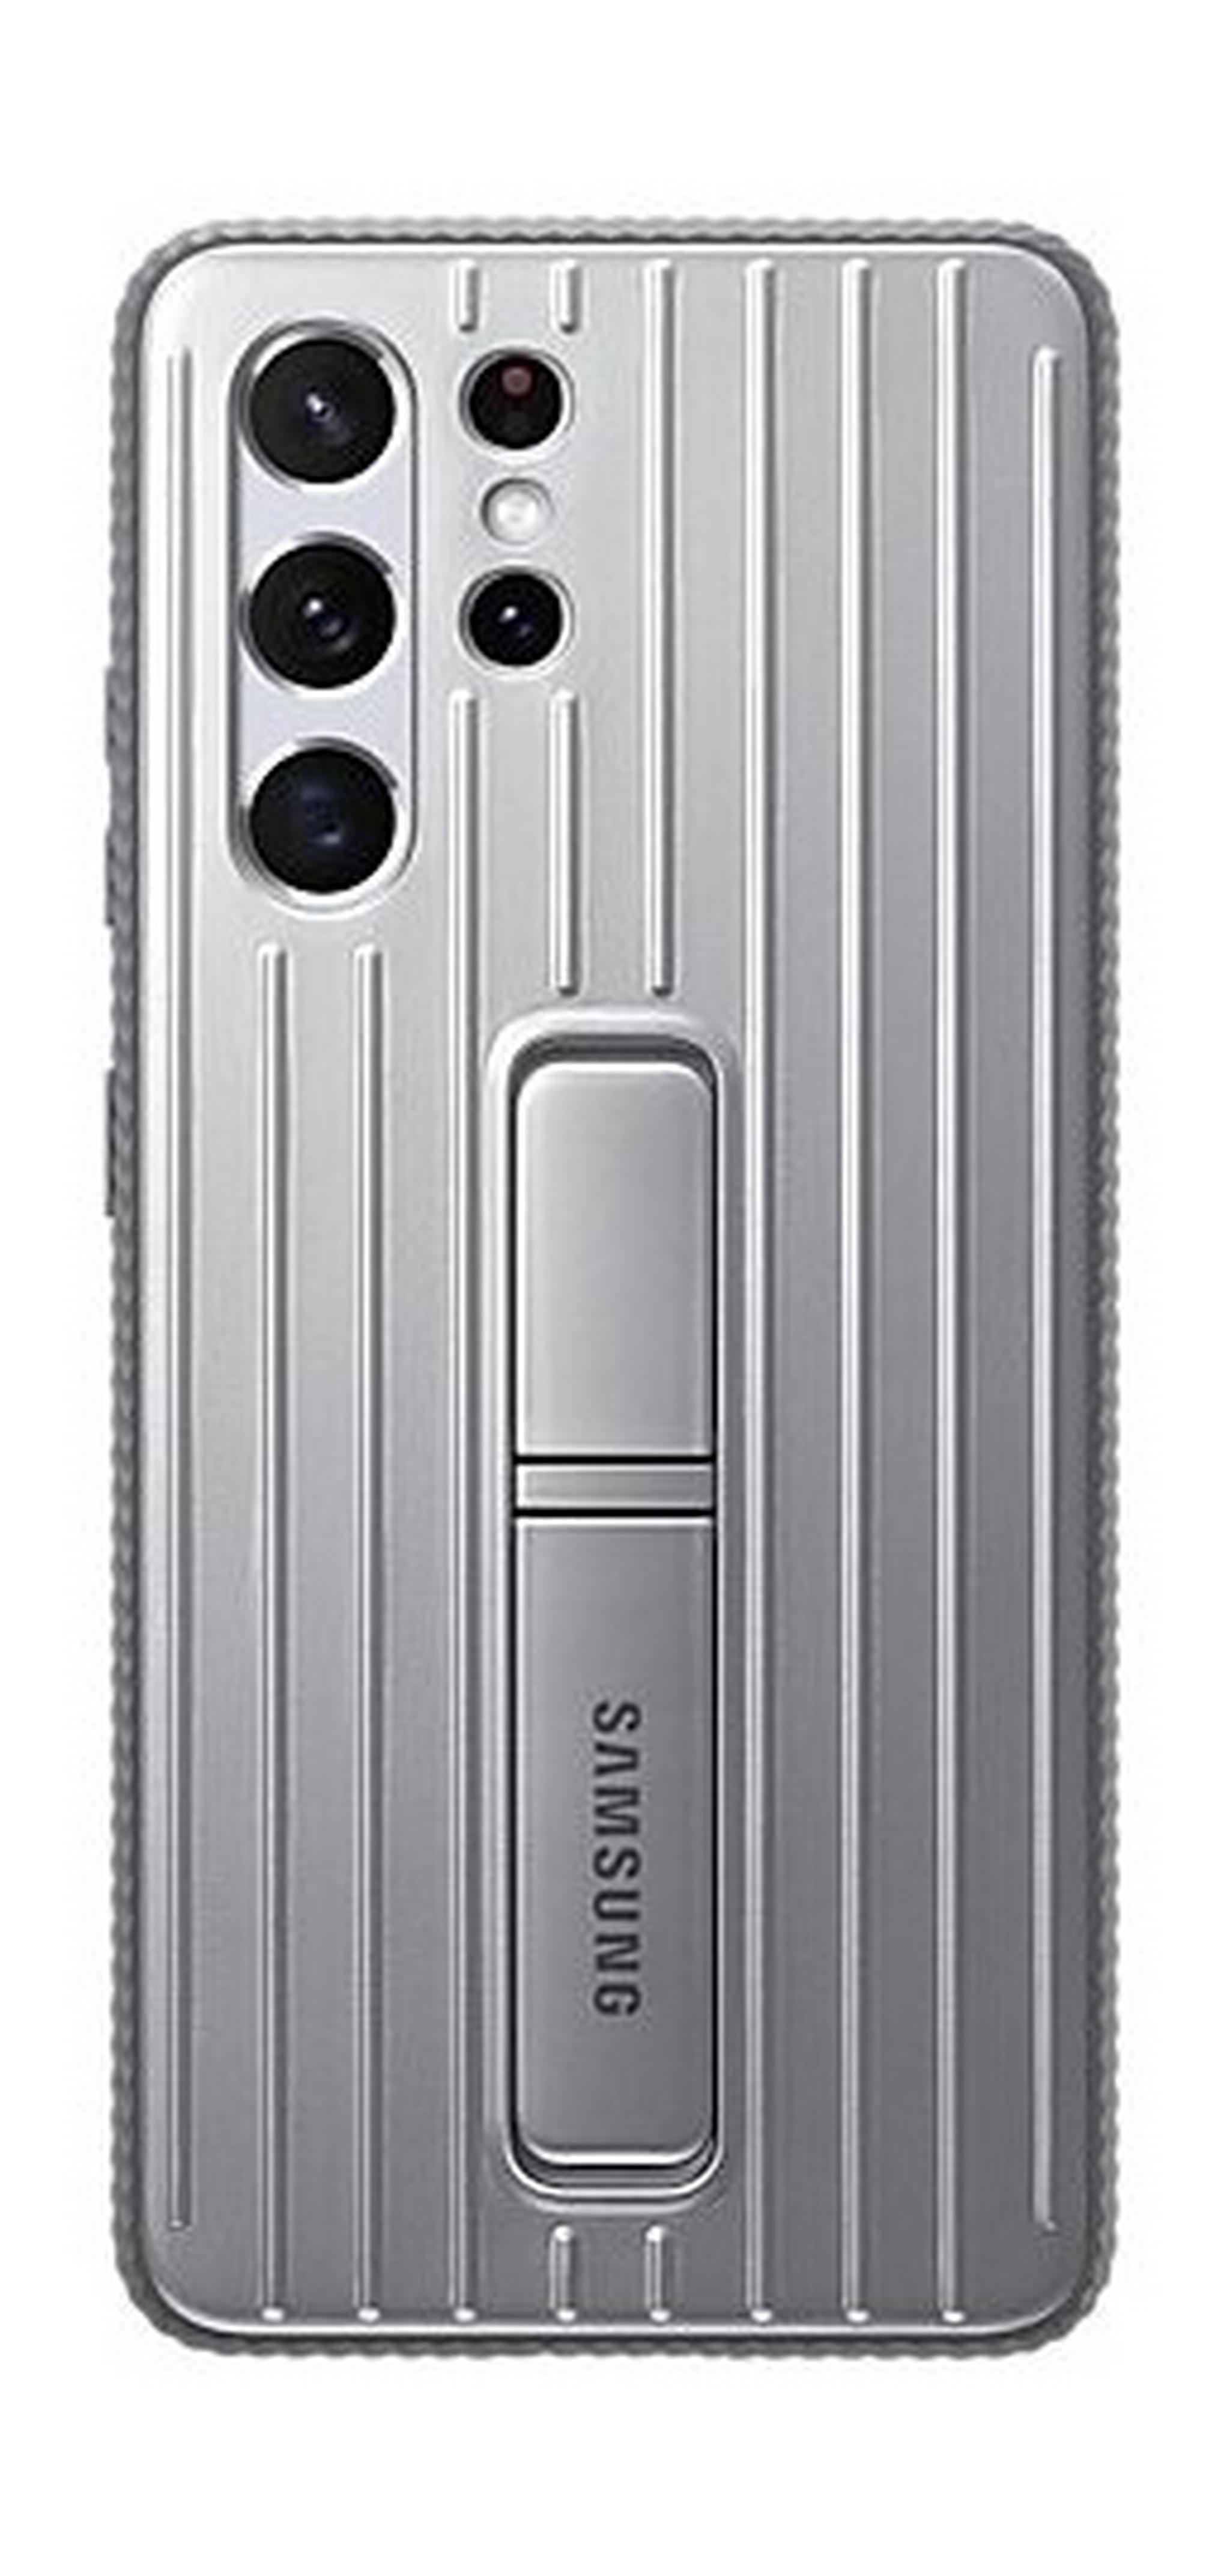 Samsung Galaxy S21 Ultra Protective Standing Cover (RG998CJ) - Grey